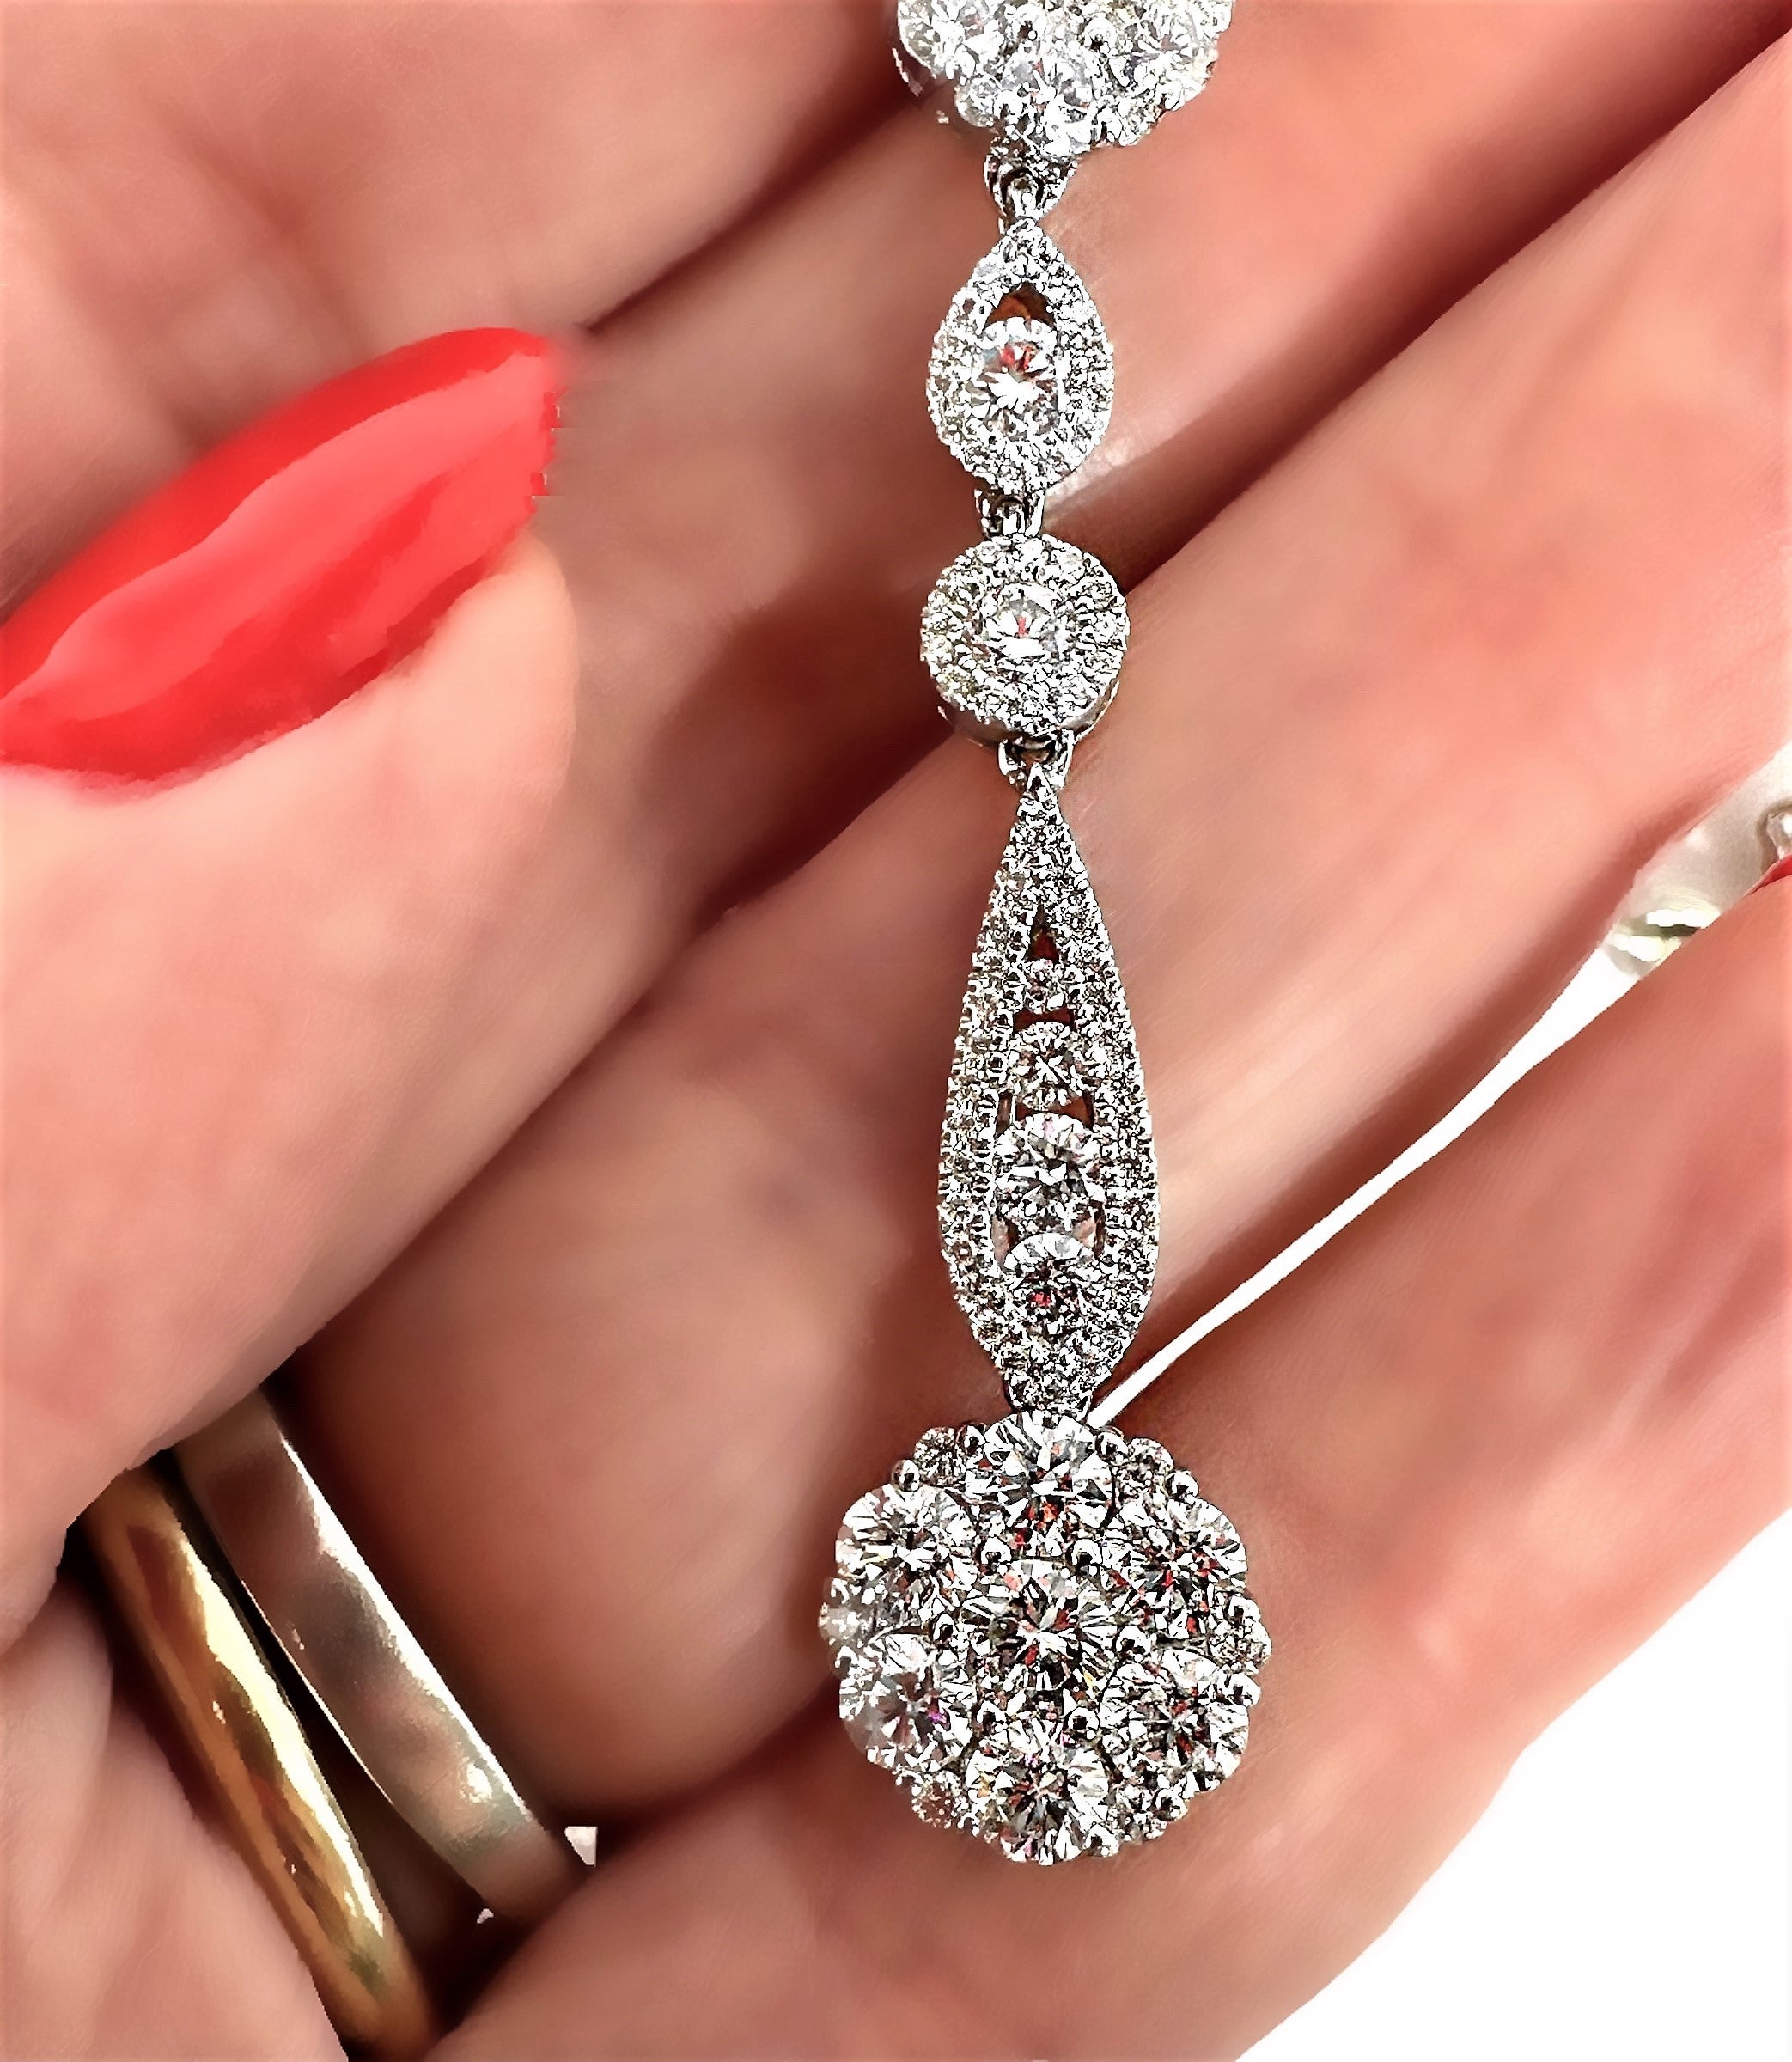 Brilliant Cut Scintillating Modern 18K White Gold Diamond Fashion Necklace with Drop For Sale